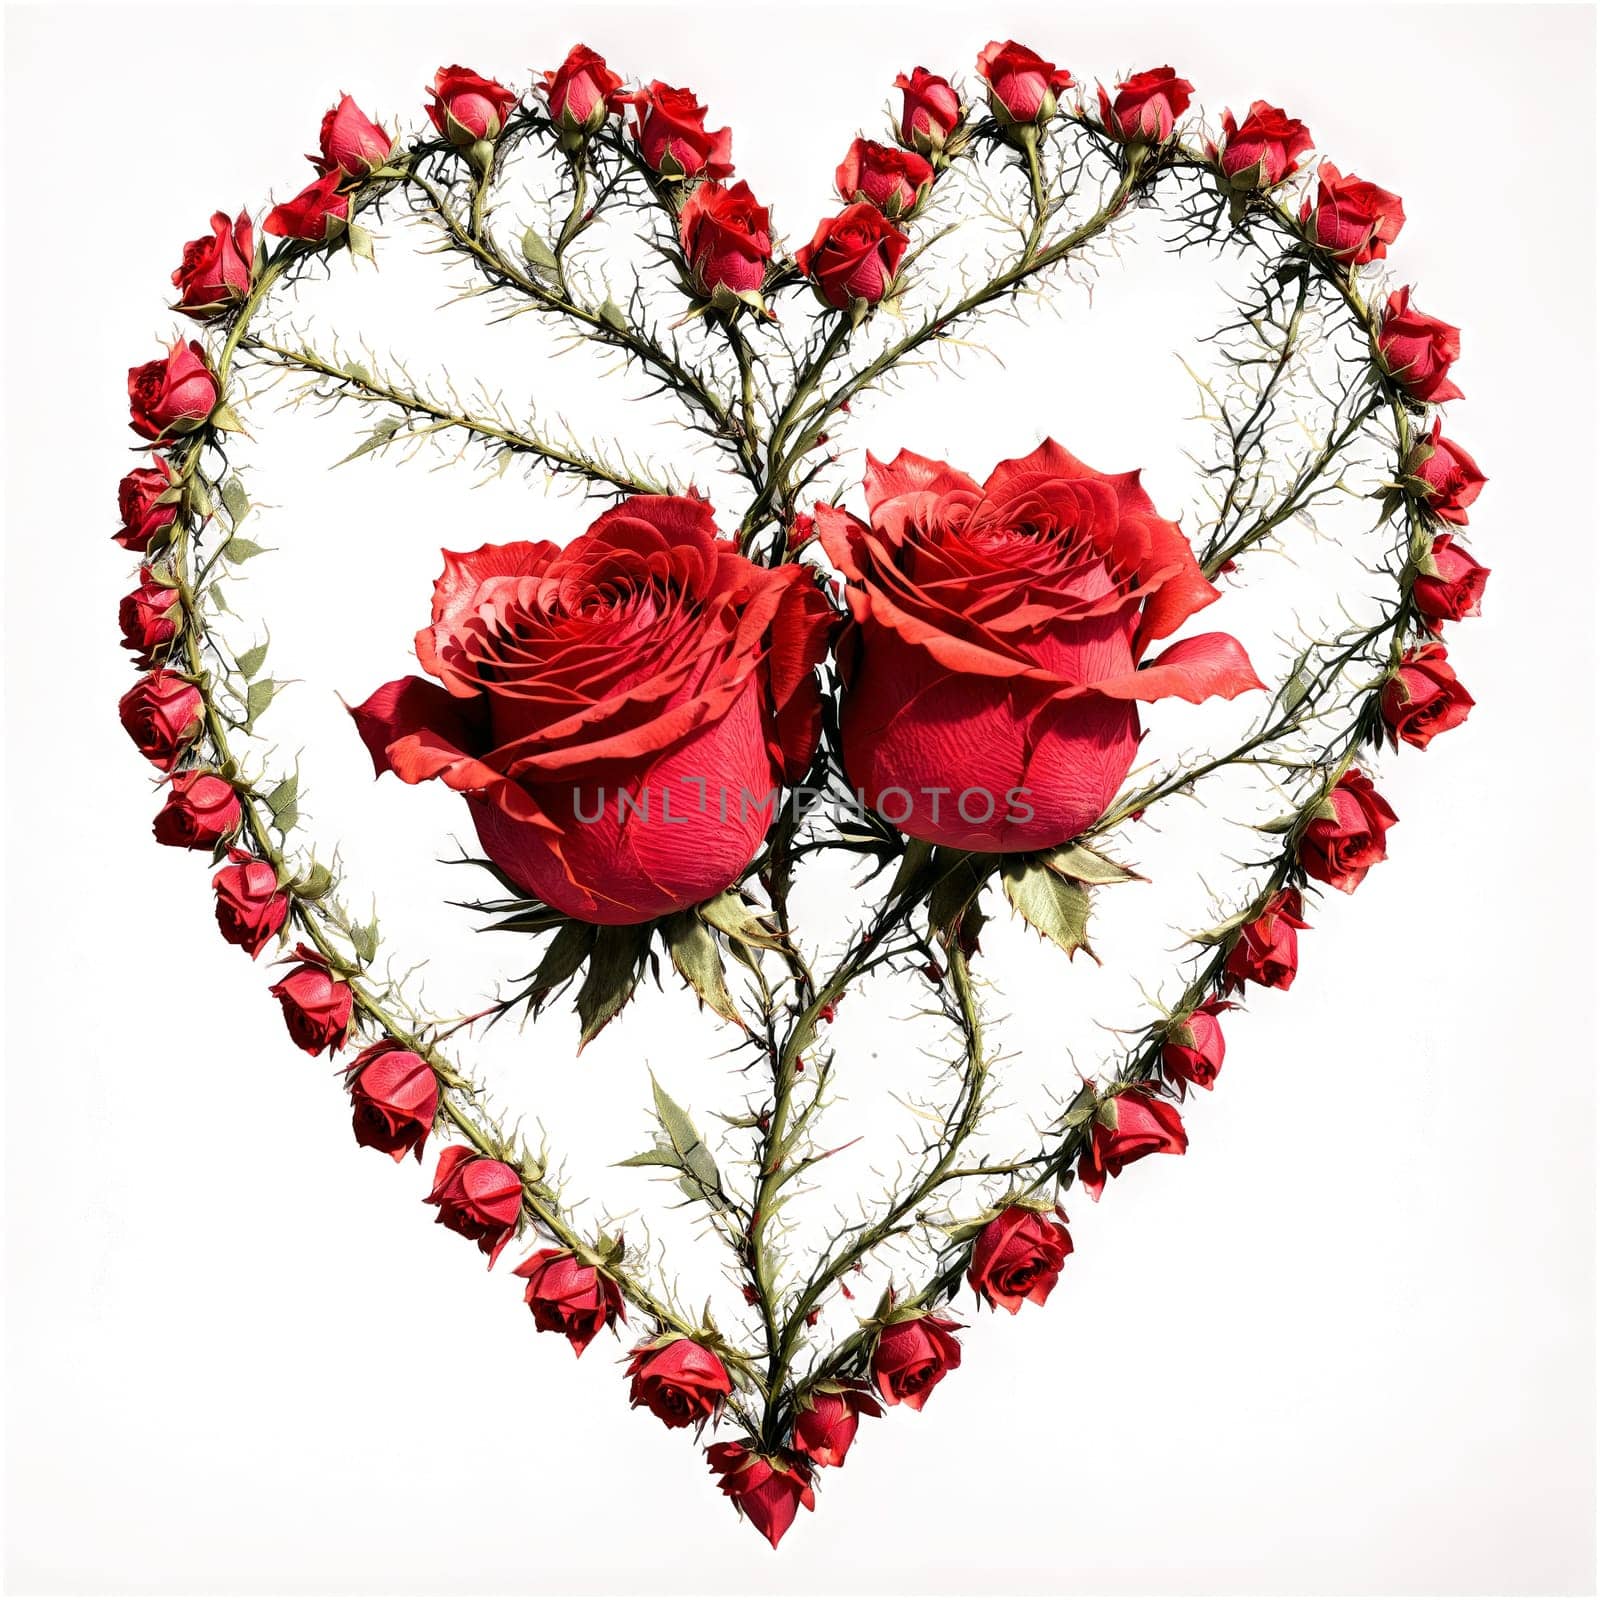 Heart formed by intertwined red rose petals and thorny stems transparent background kinetic ad visual by panophotograph